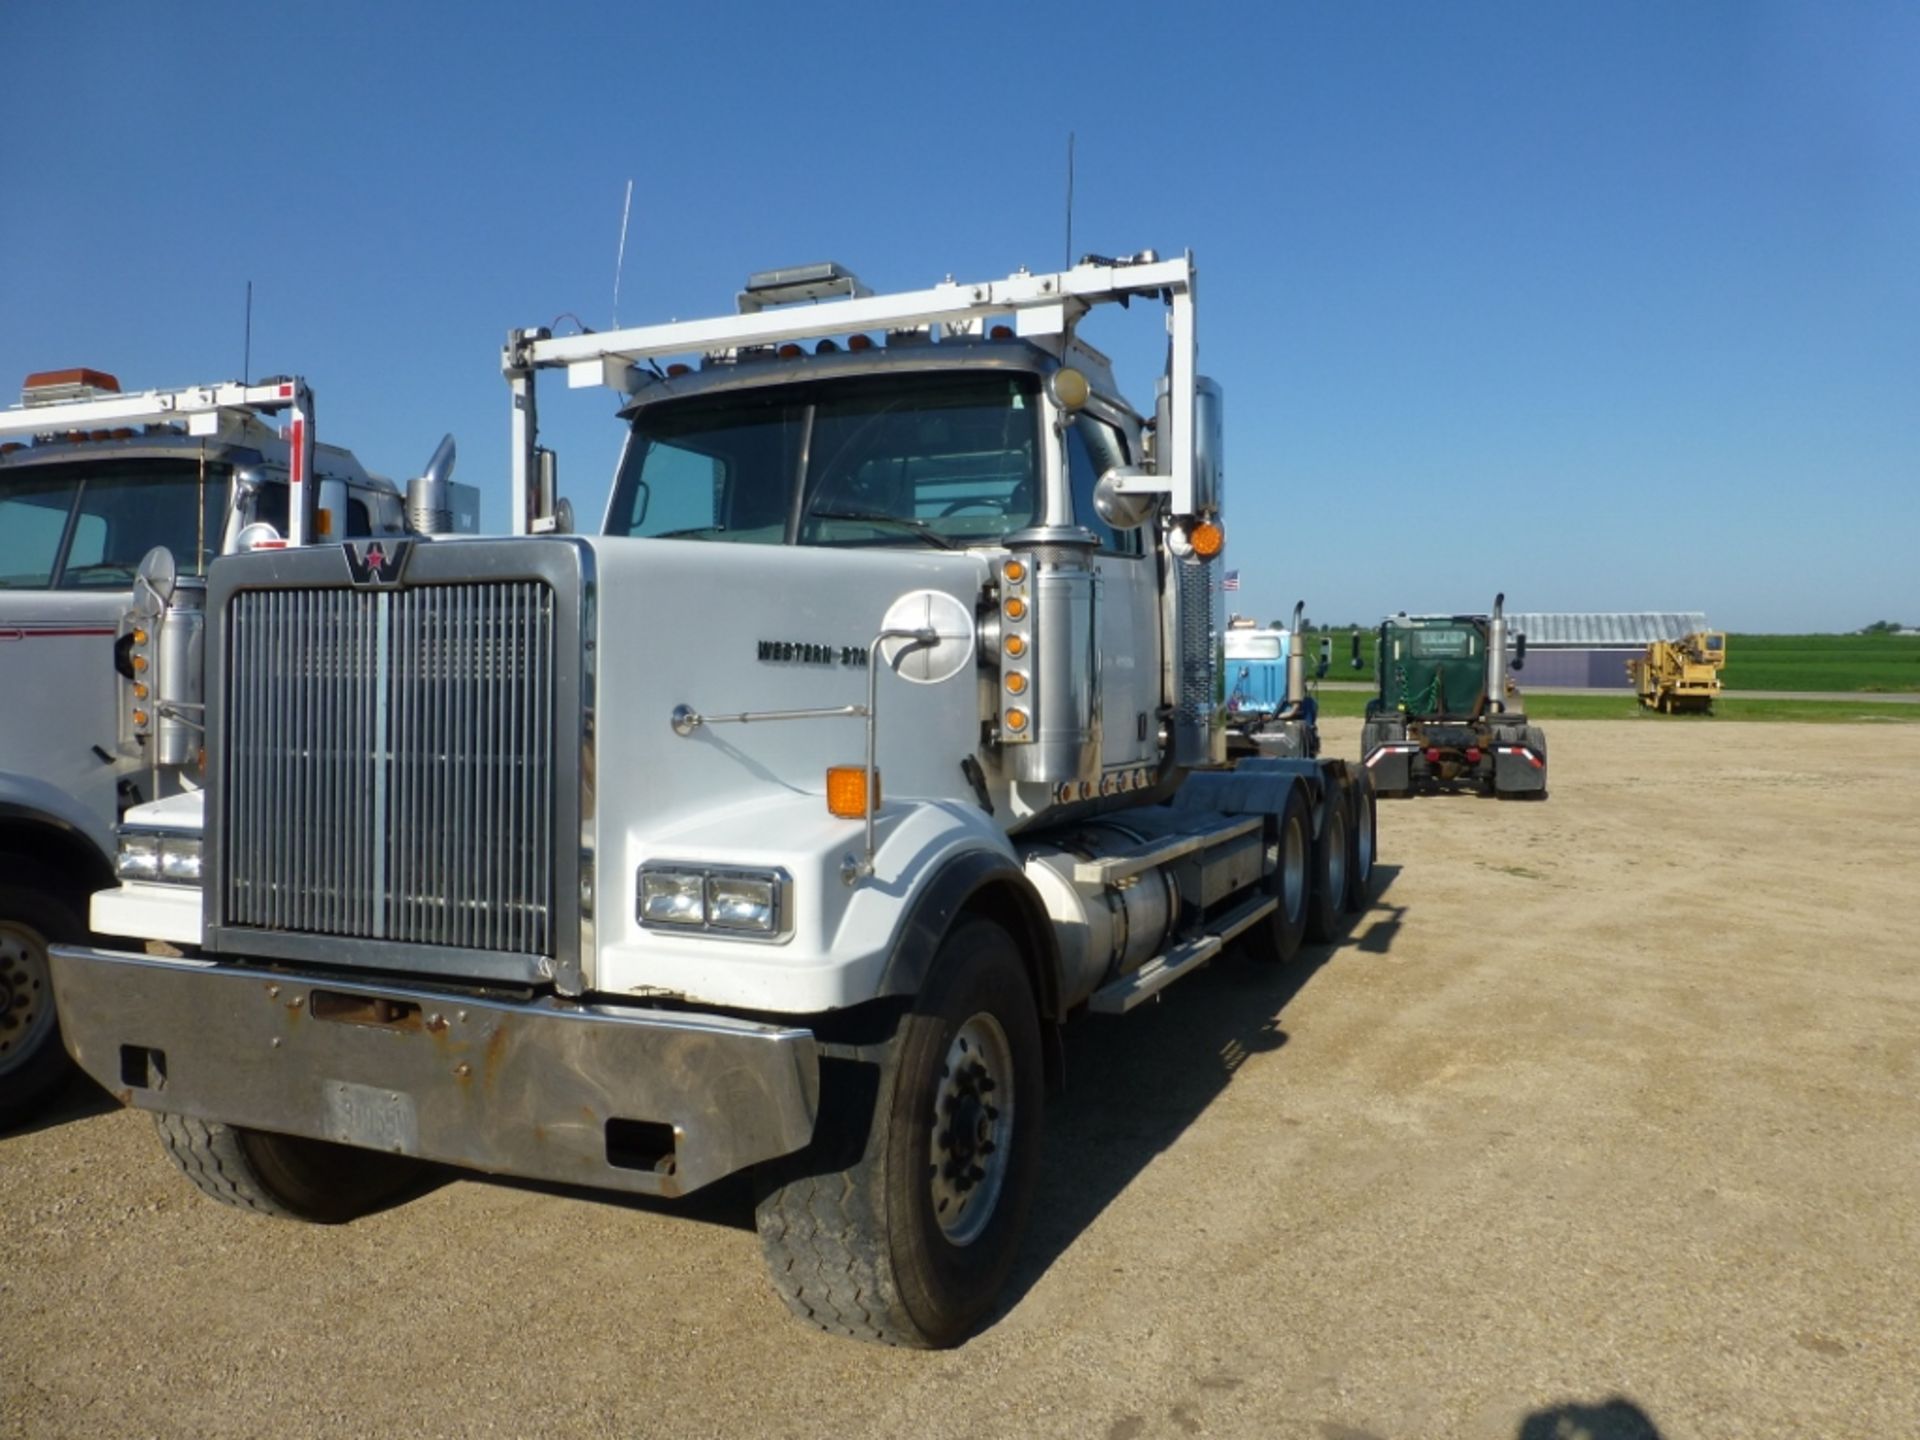 2006 Freightliner Western Star 4900EX, Heavy Haul Day cab, 3 axle, Eaton Fuller H/L 18 spd trans, - Image 11 of 26